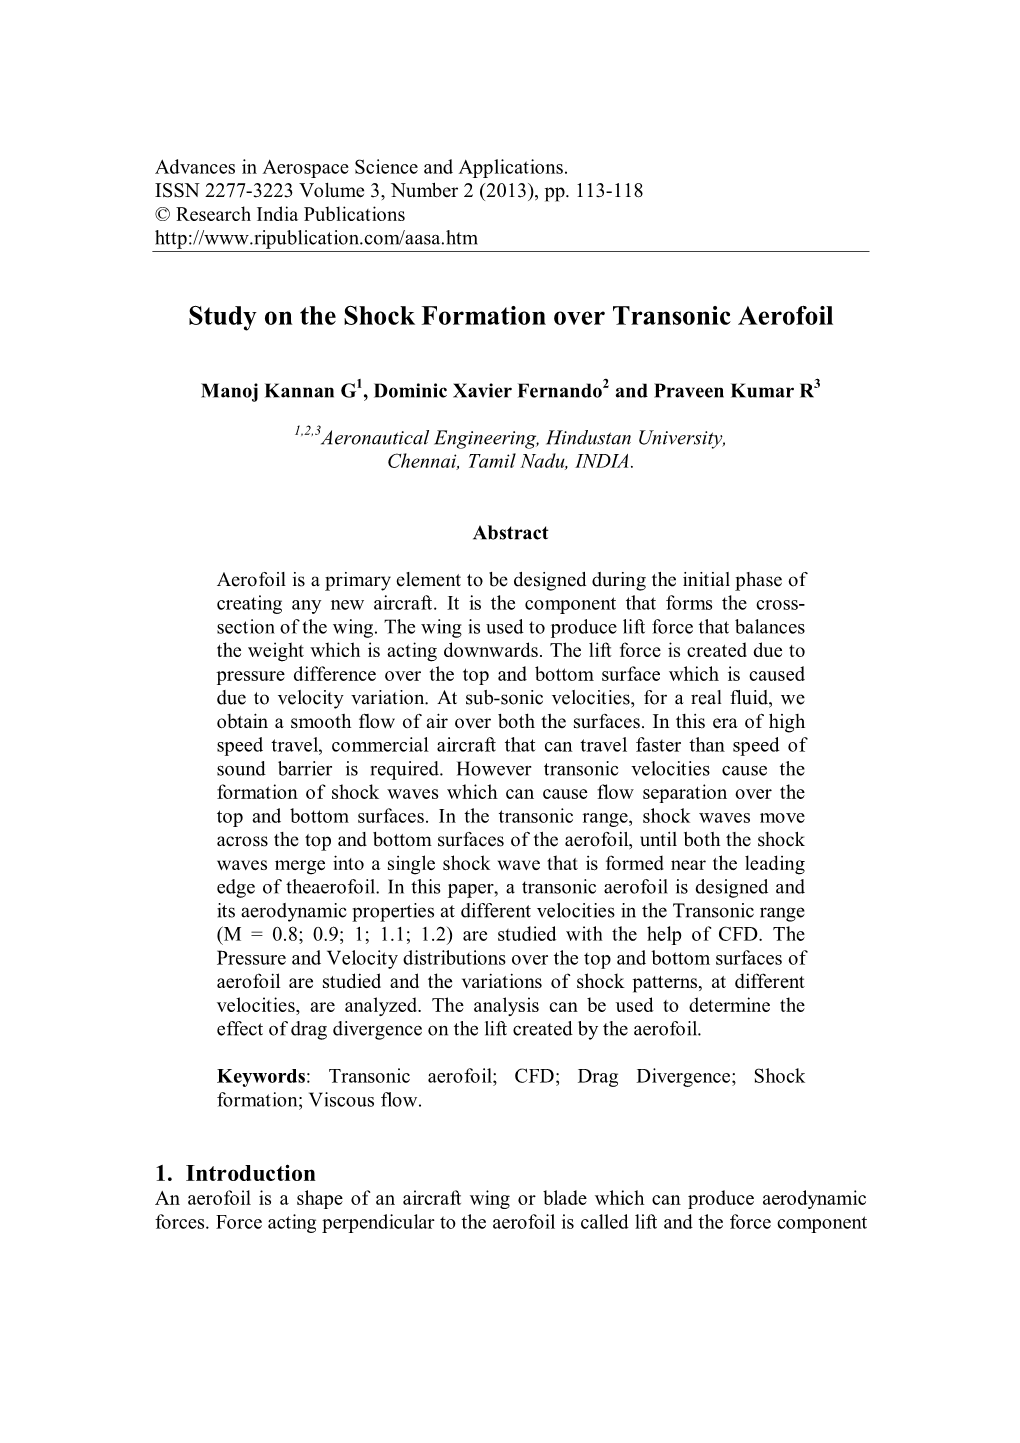 Study on the Shock Formation Over Transonic Aerofoil